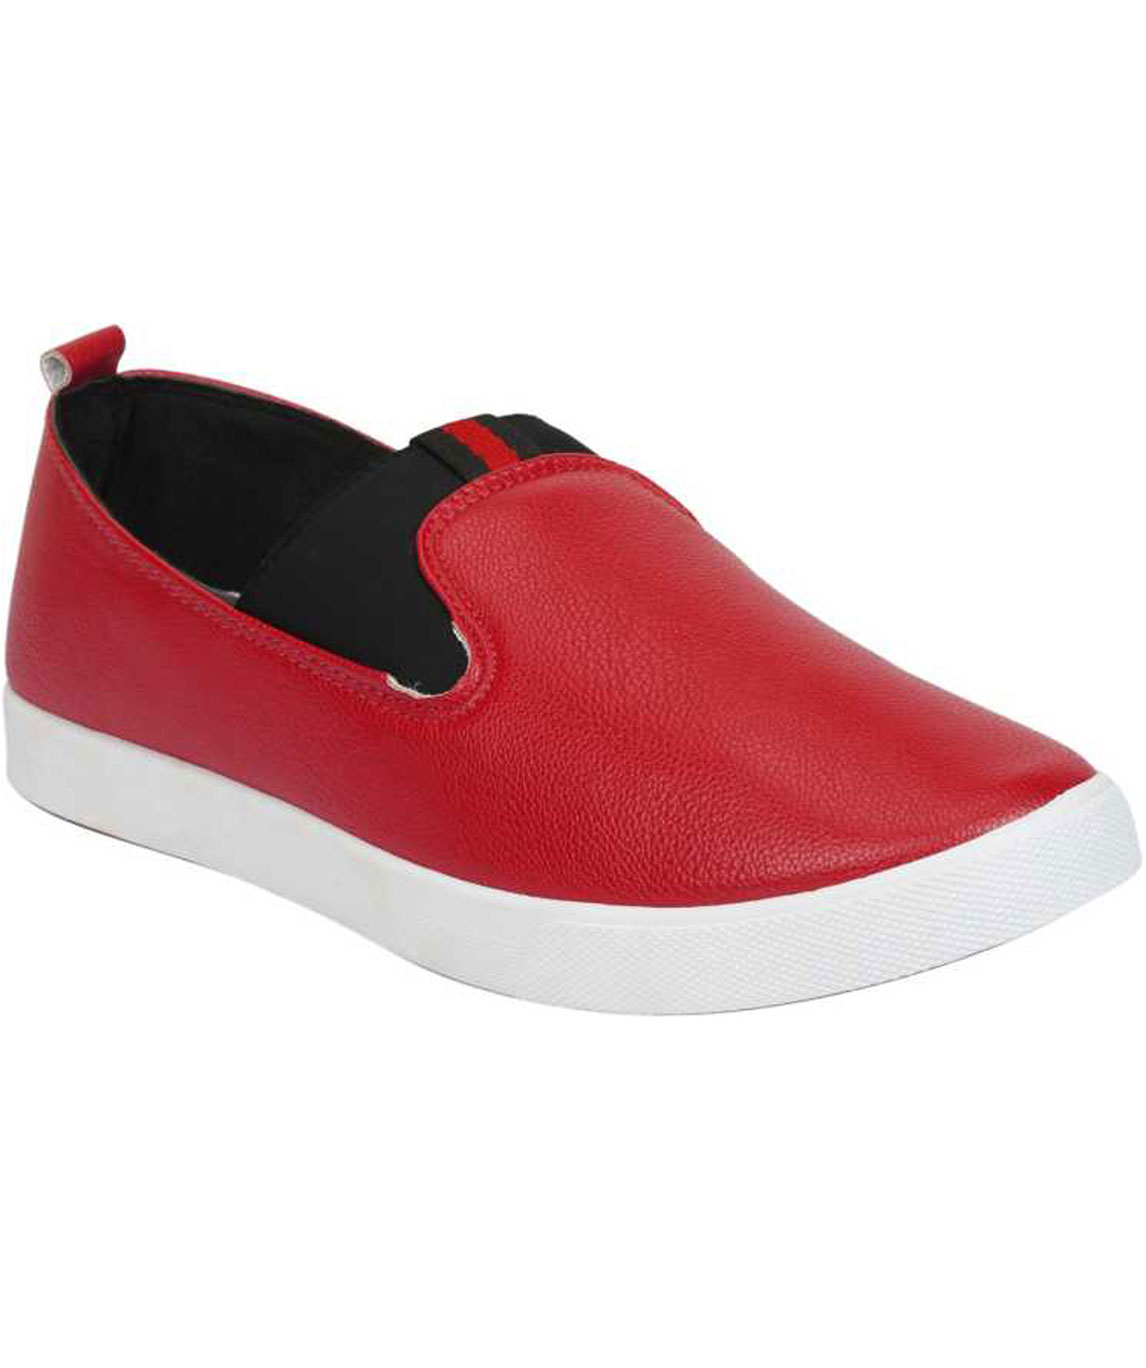 VOSTRO-XAVIER CASUAL SHOES OR SNEAKERS FOR MEN/BOYS(RED)